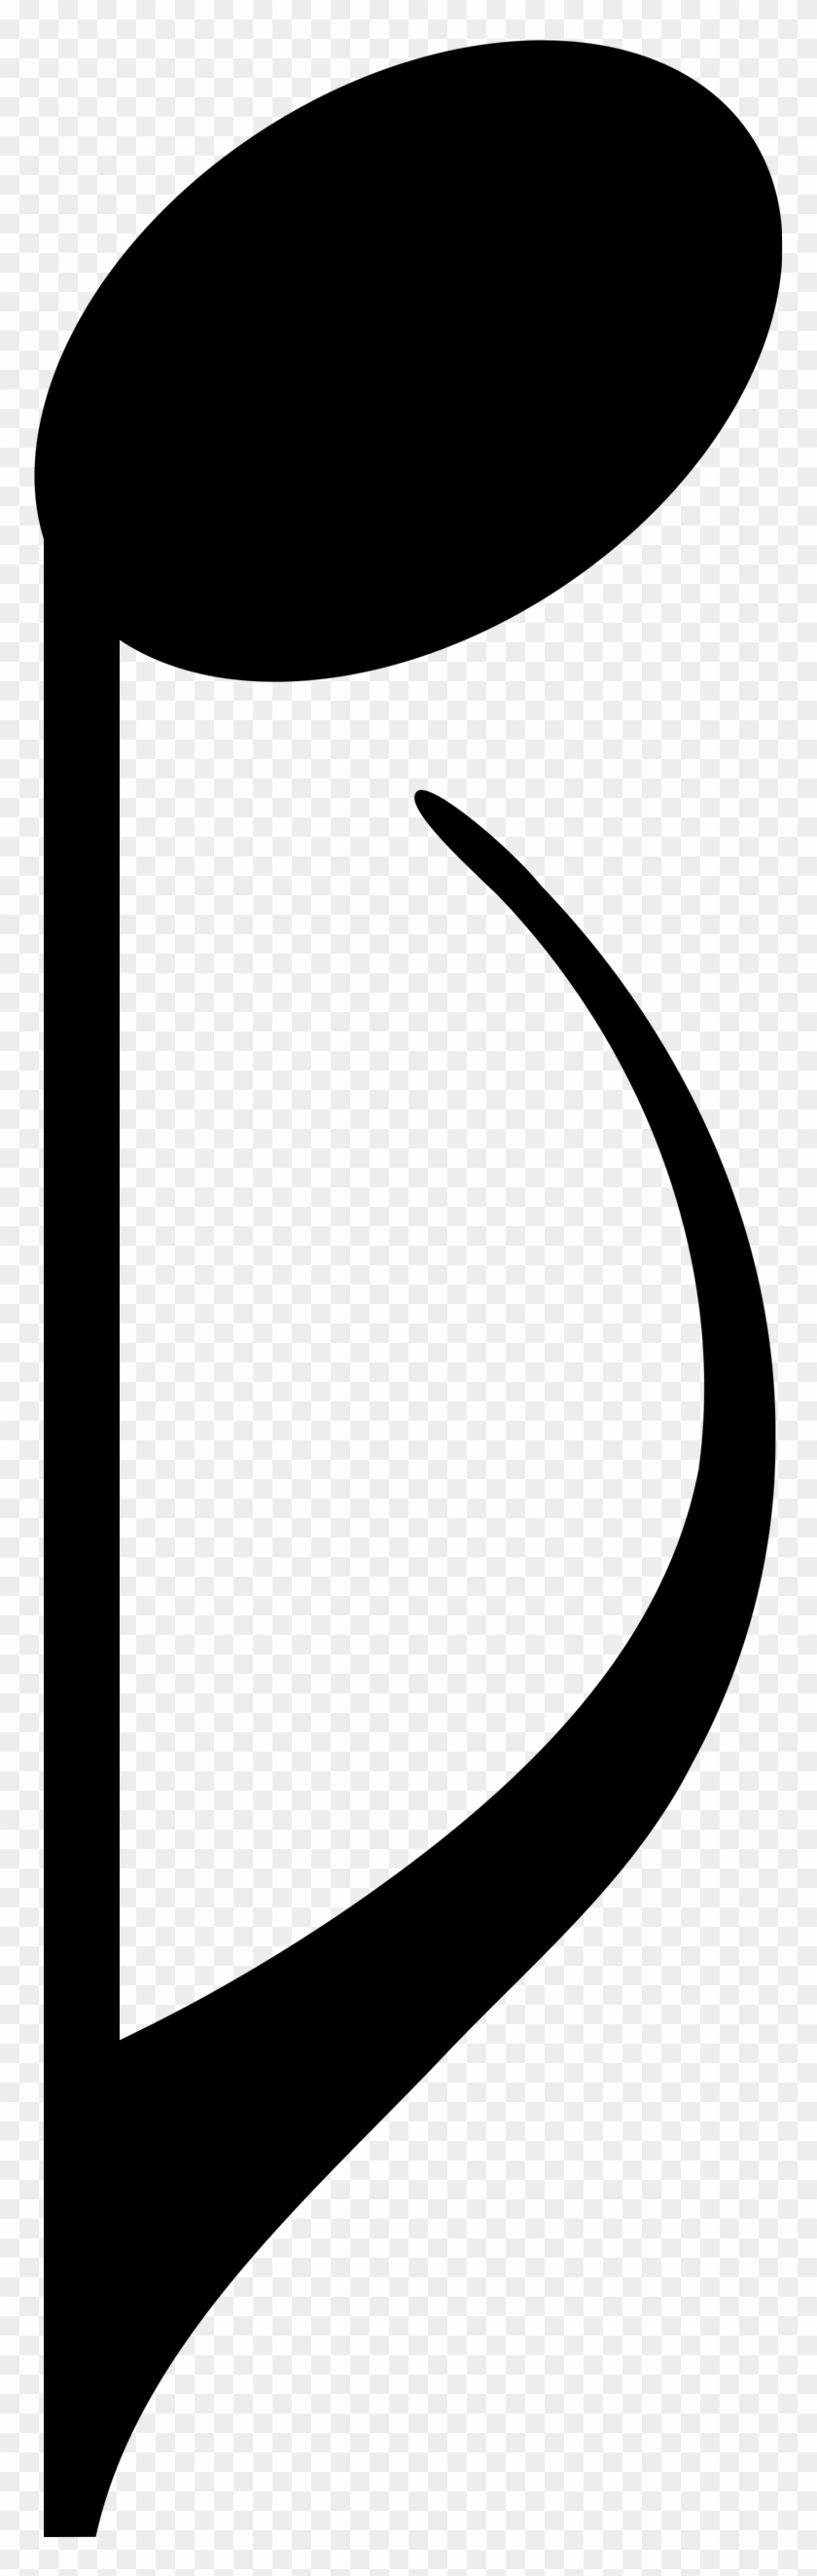 Upside Down Quarter Note Png - Music Note Upside Down Clipart #1536133